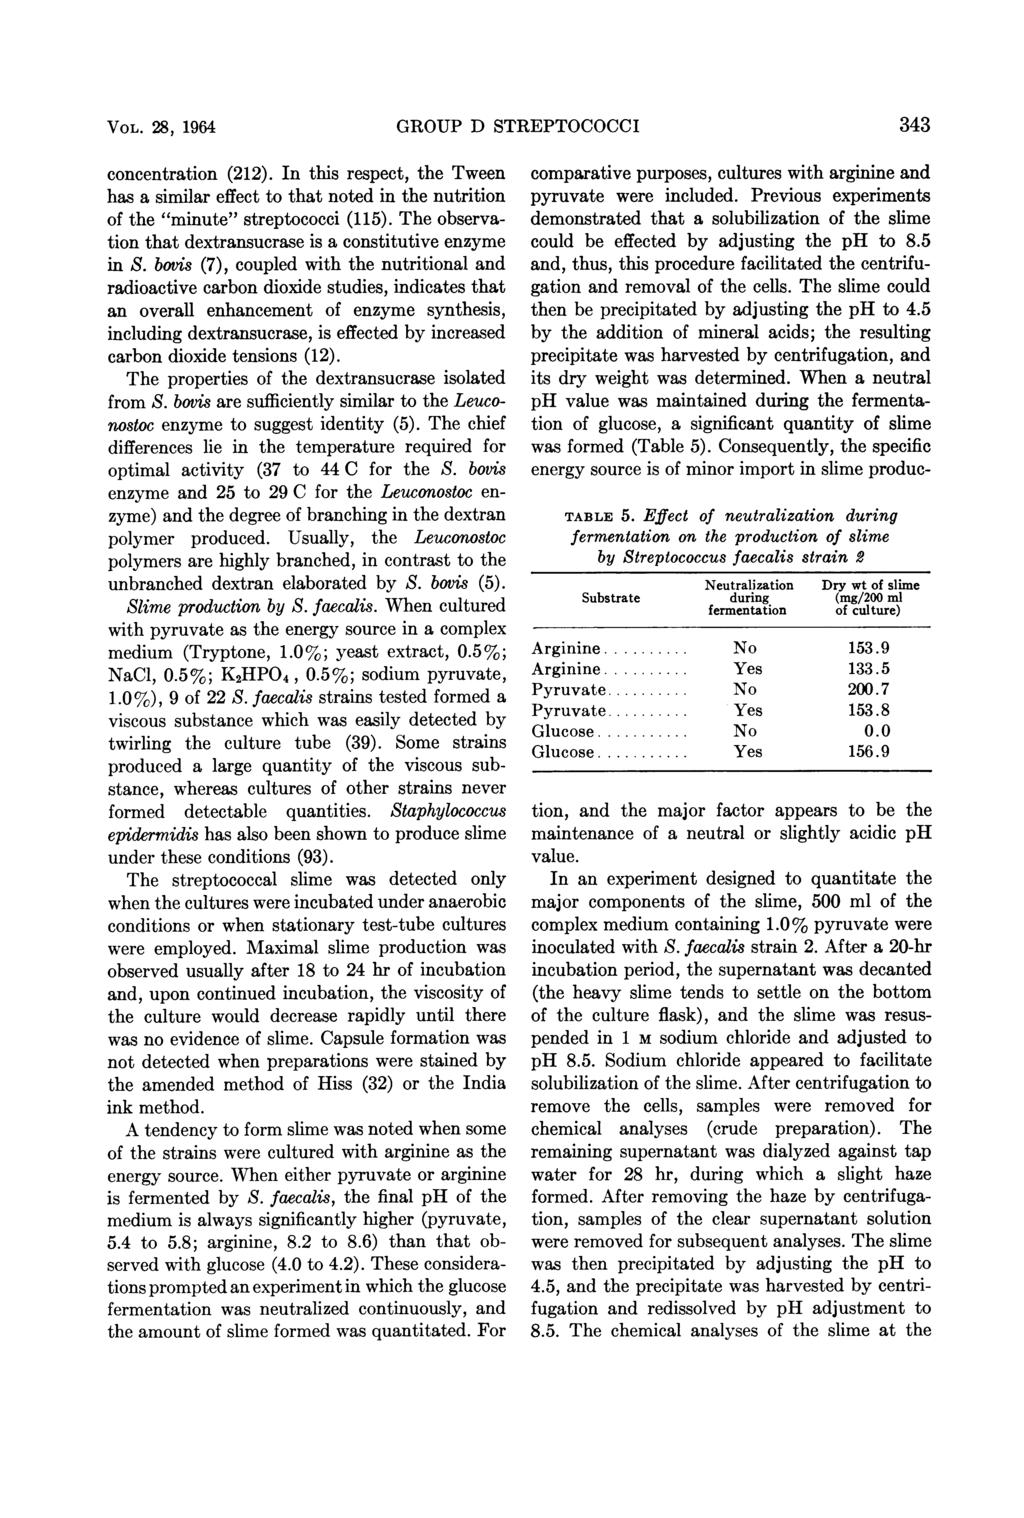 VOL. 28, 1964 GROUP D STREPTOCOCCI 343 concentration (212). In this respect, the Tween has a similar effect to that noted in the nutrition of the "minute" streptococci (115).